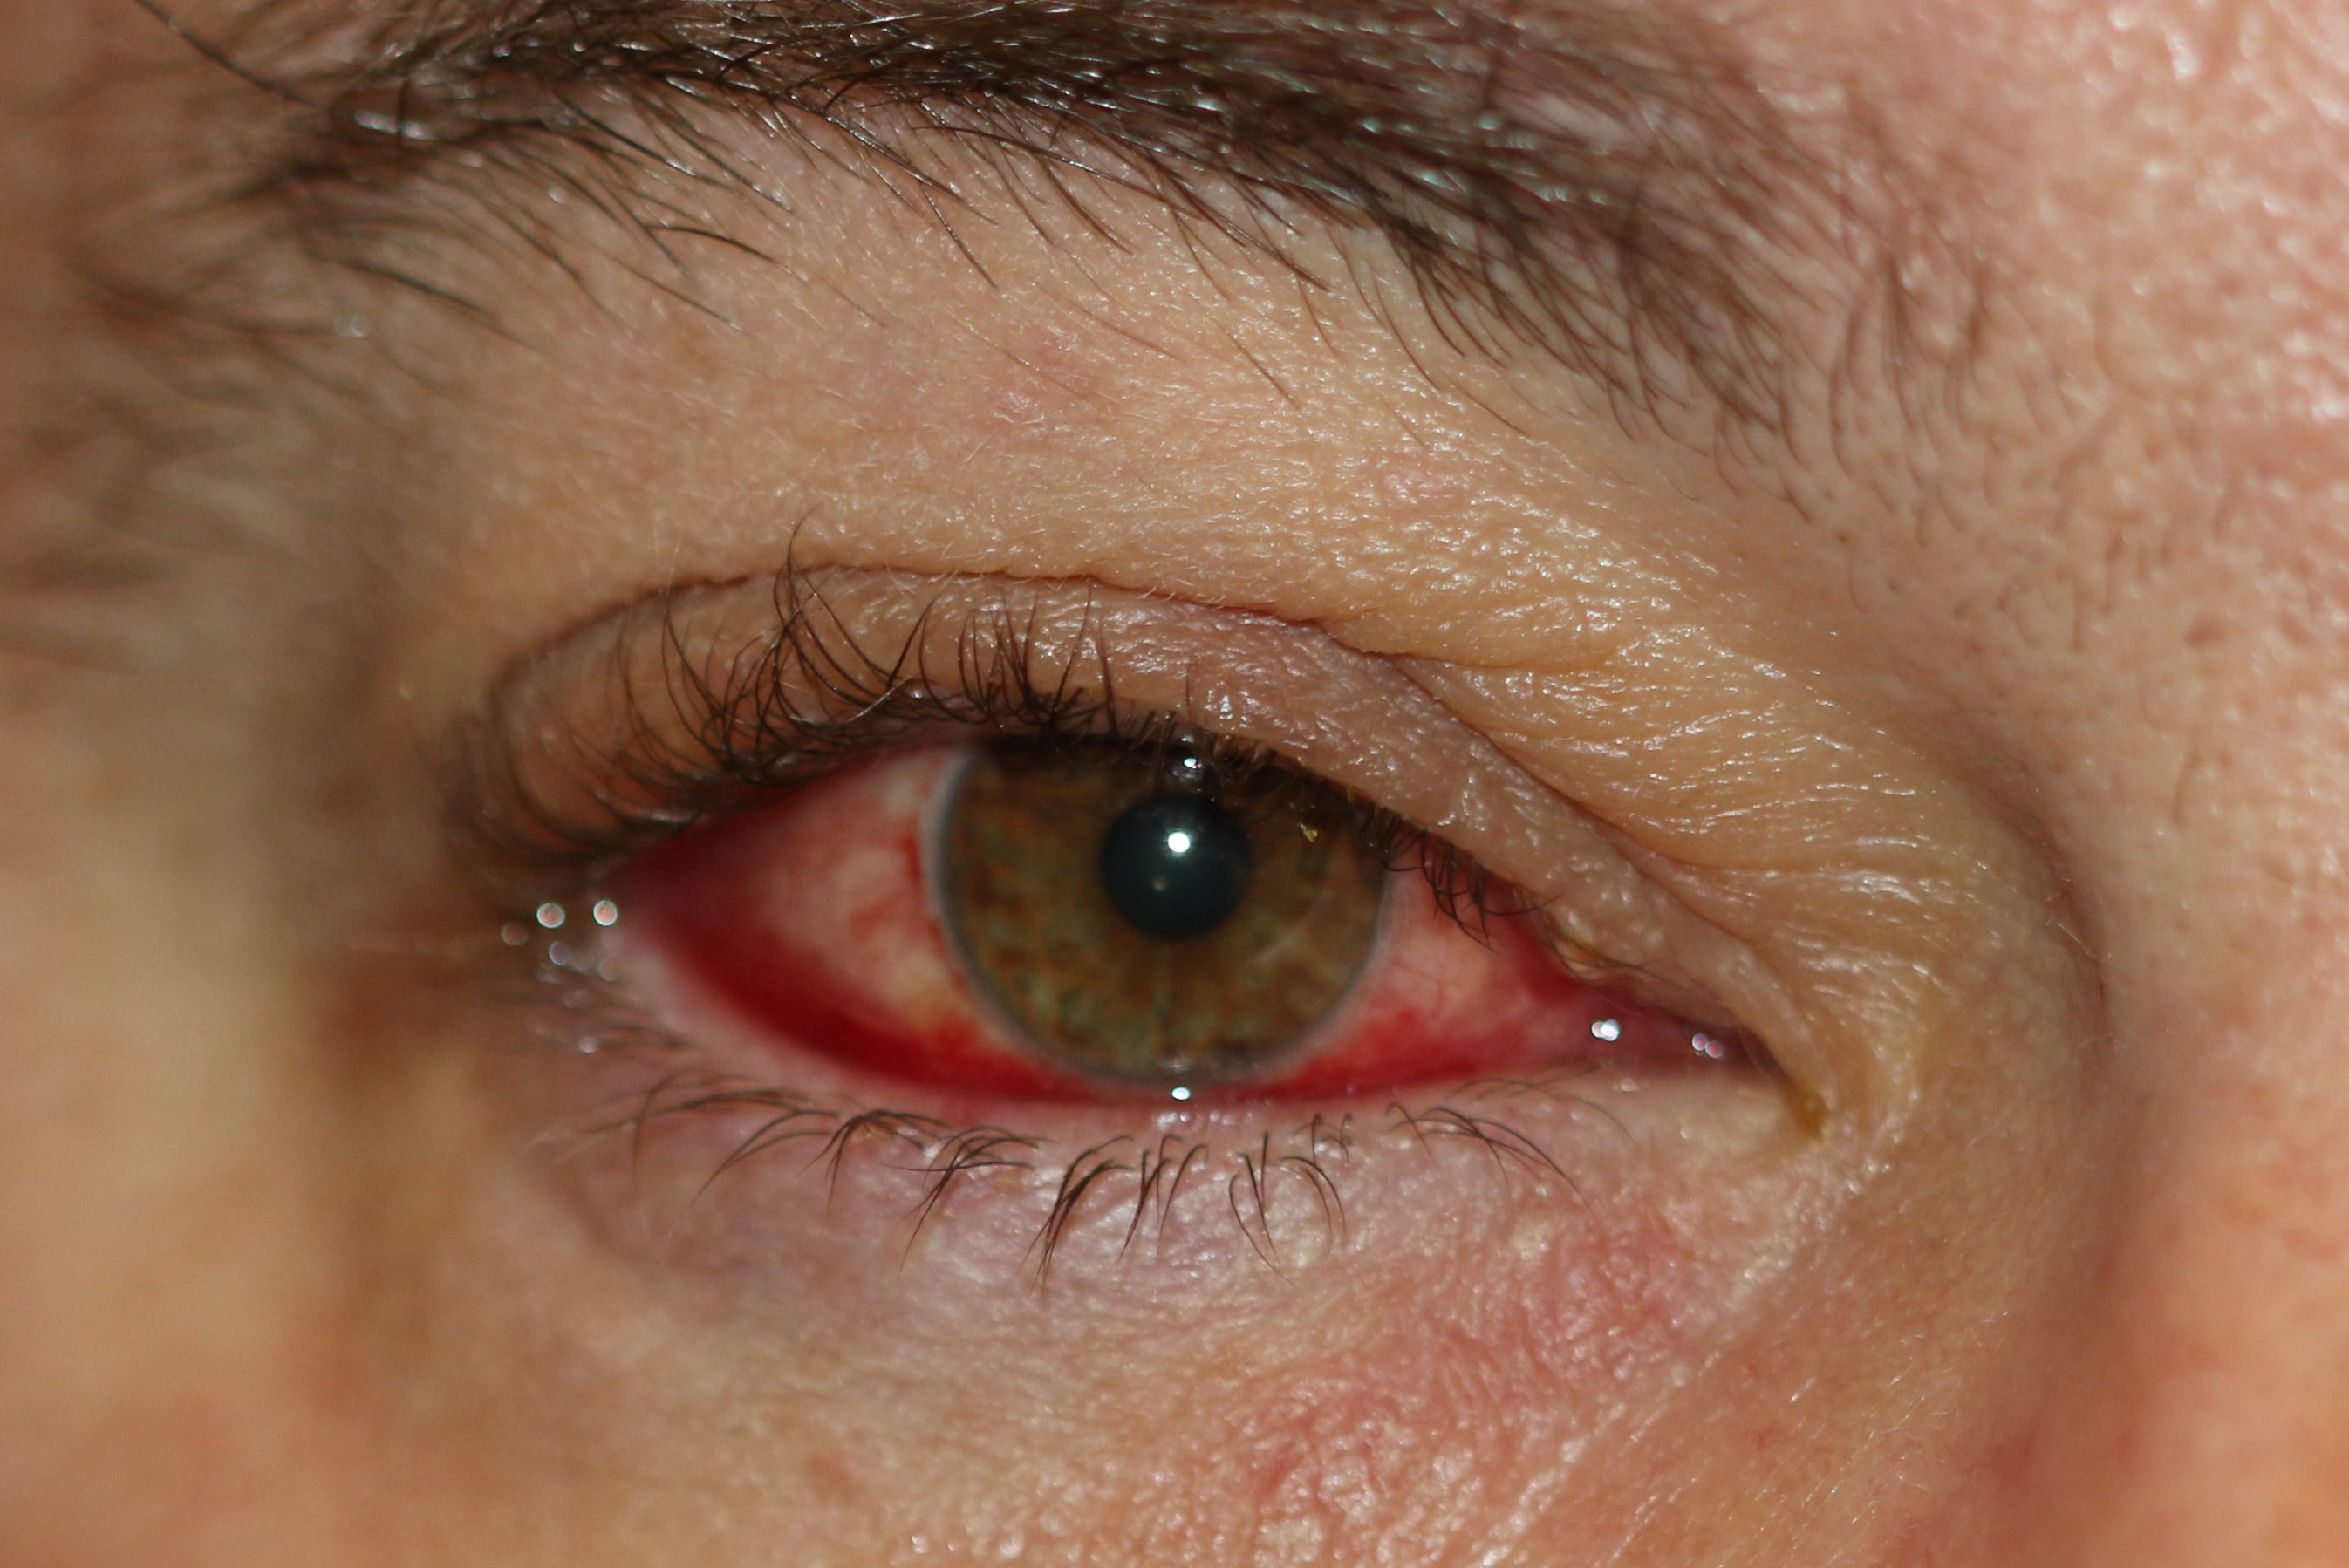 Blepharoconjunctivitis with inflammation of the eyelid margin and conjunctiva